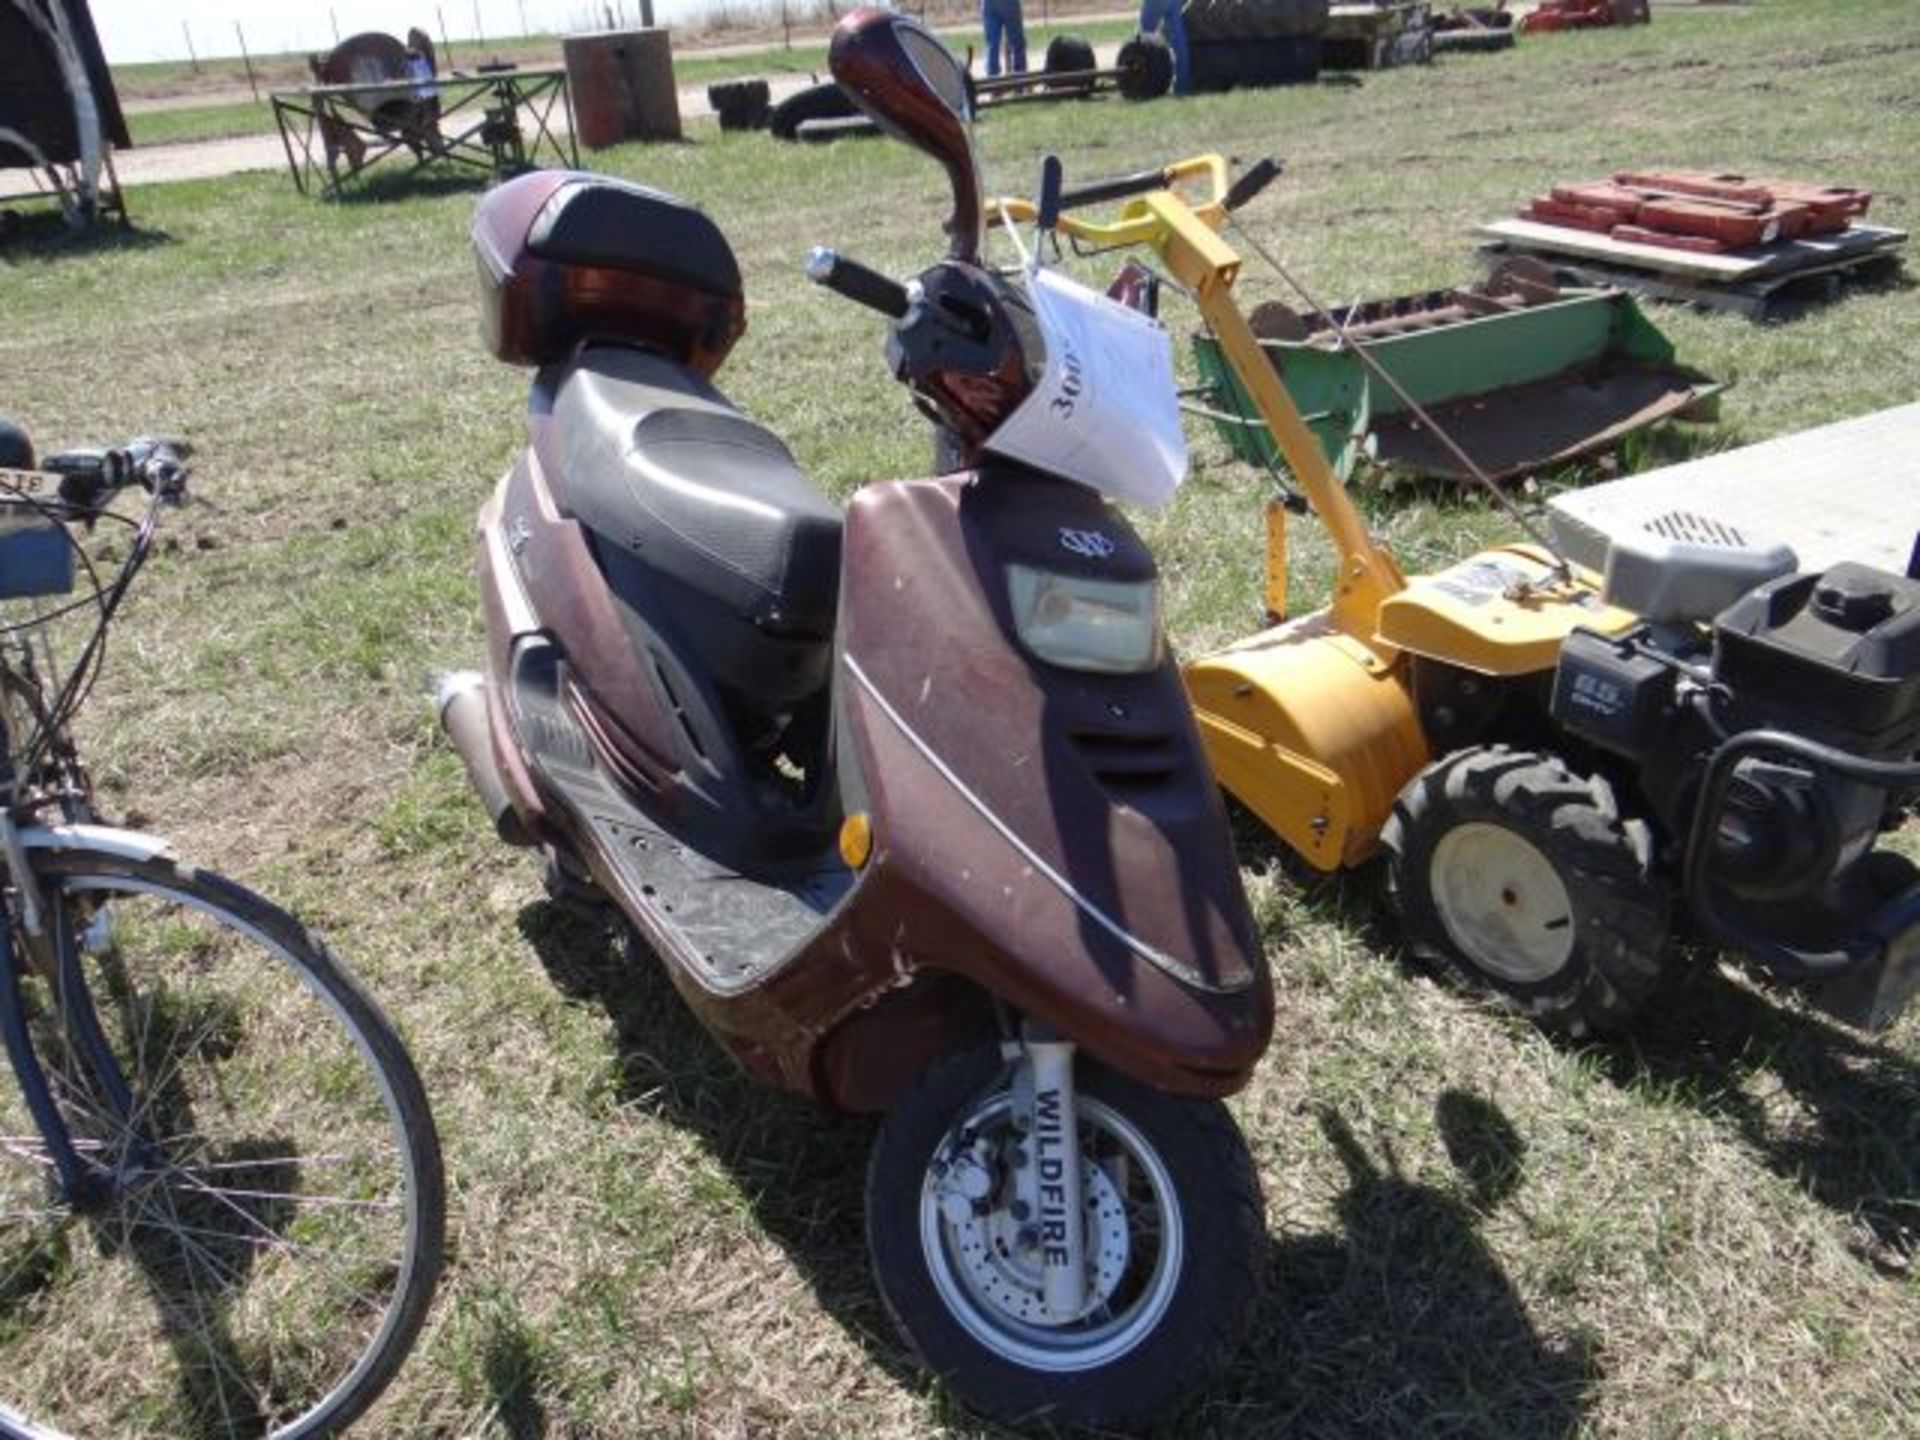 Lot 3008 Wildfire MoPed Not Running, No Title